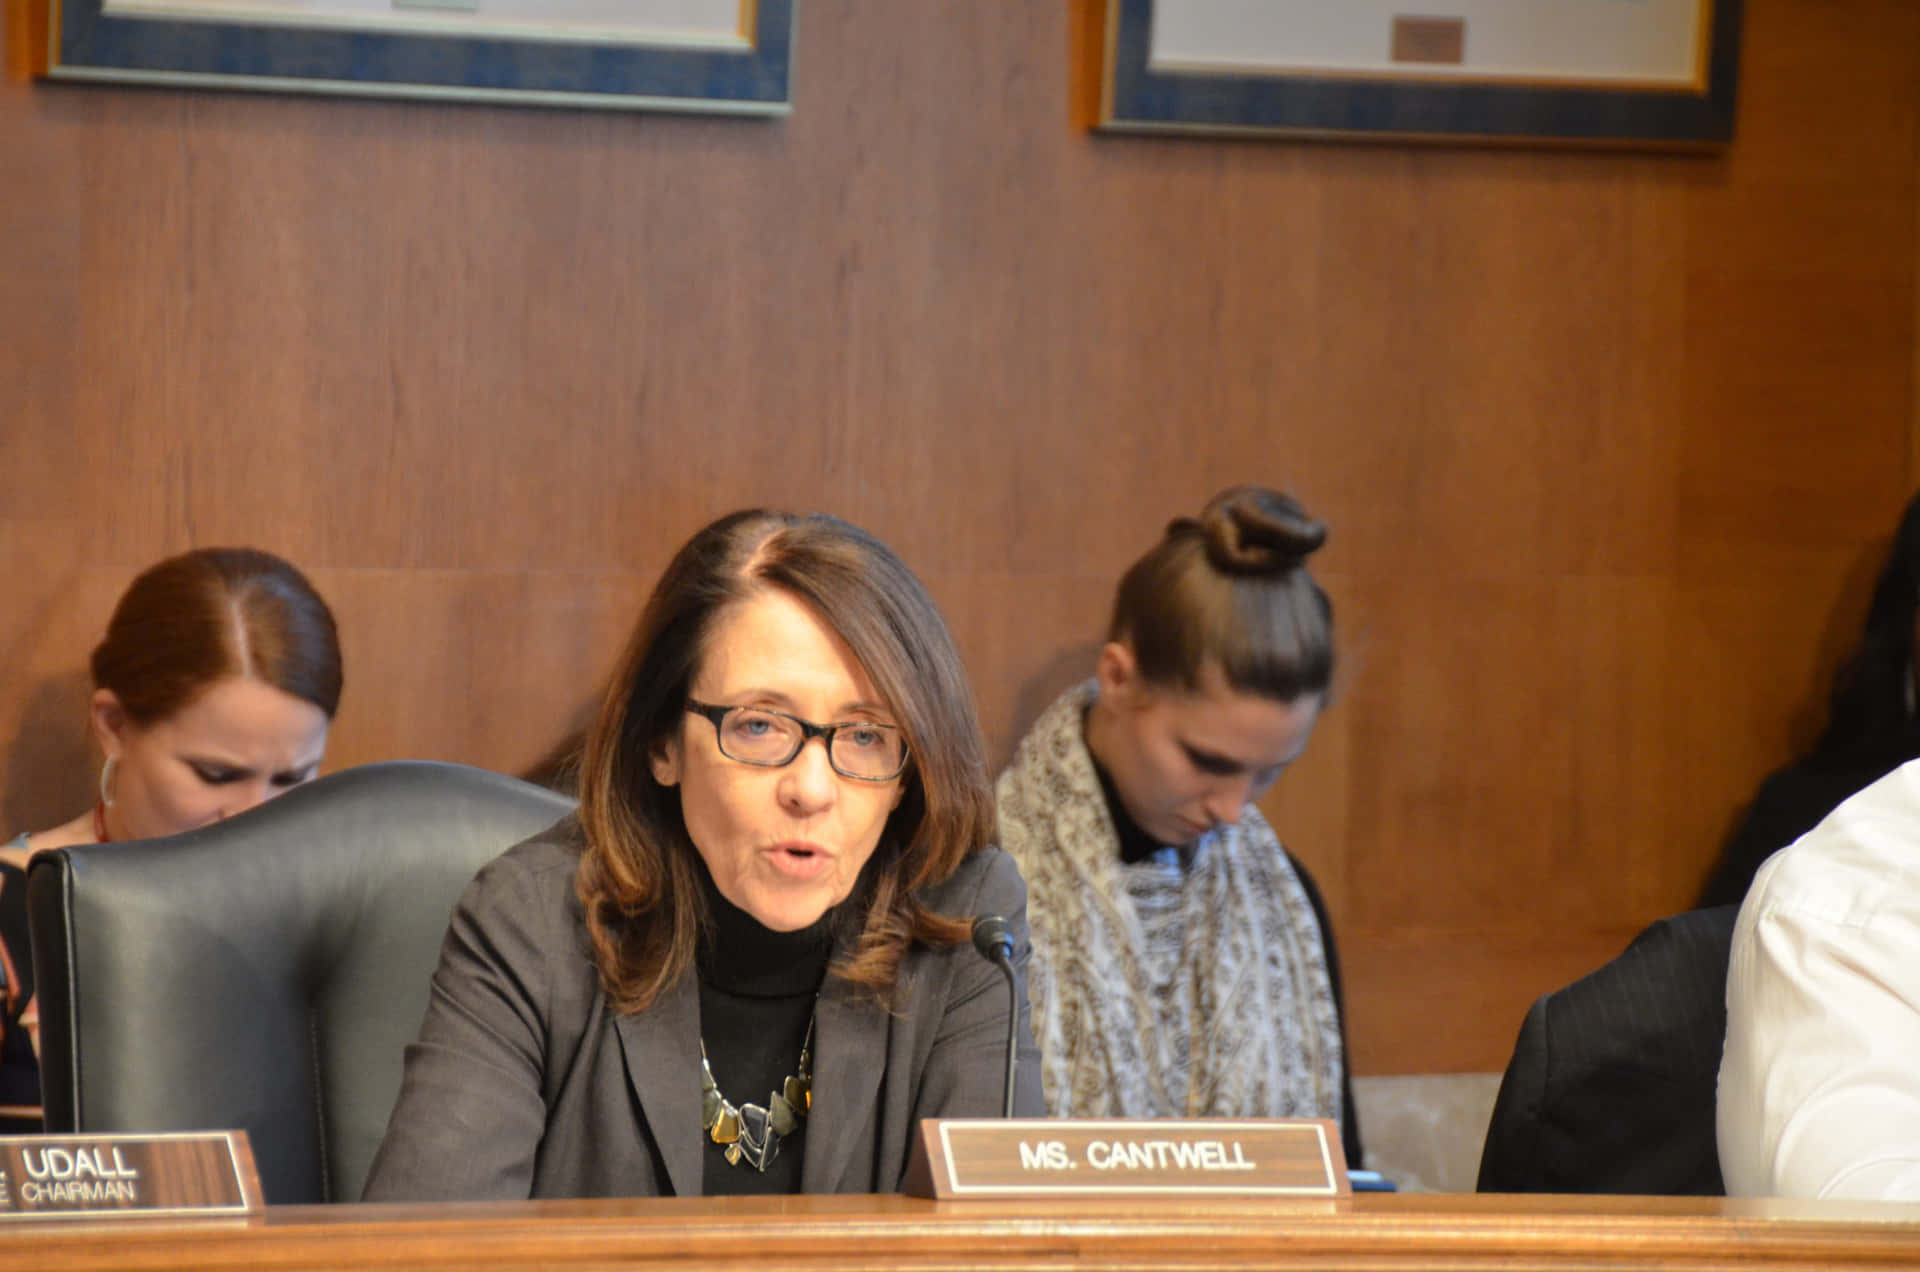 Maria Cantwell takes part in a Senate Committee Meeting Wallpaper